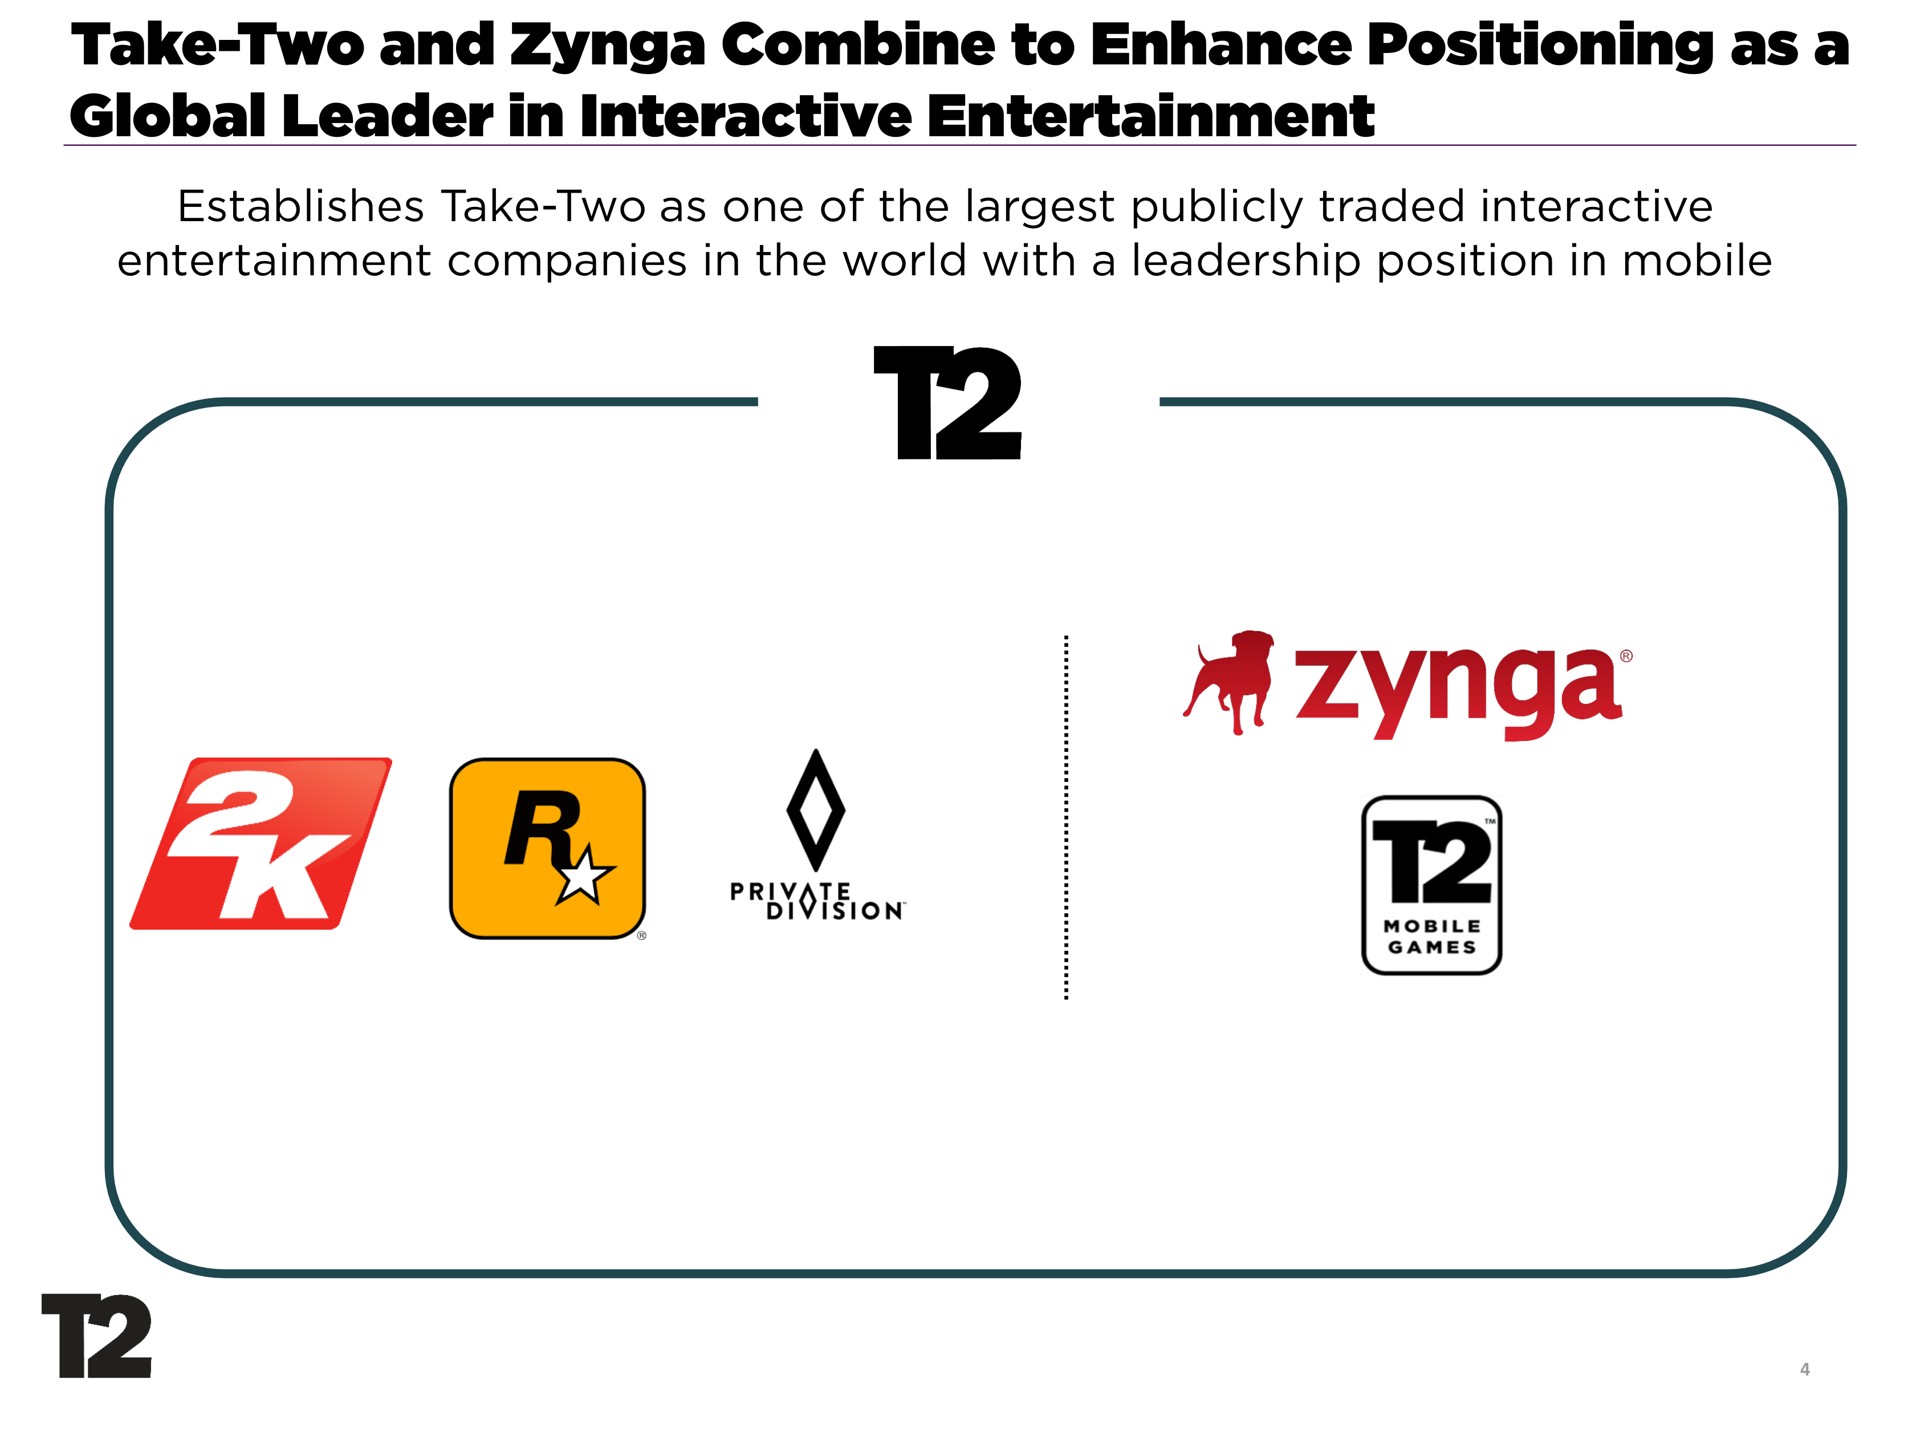 take two and combine to enhance positioning as a global leader in interactive entertainment | Take-Two Interactive